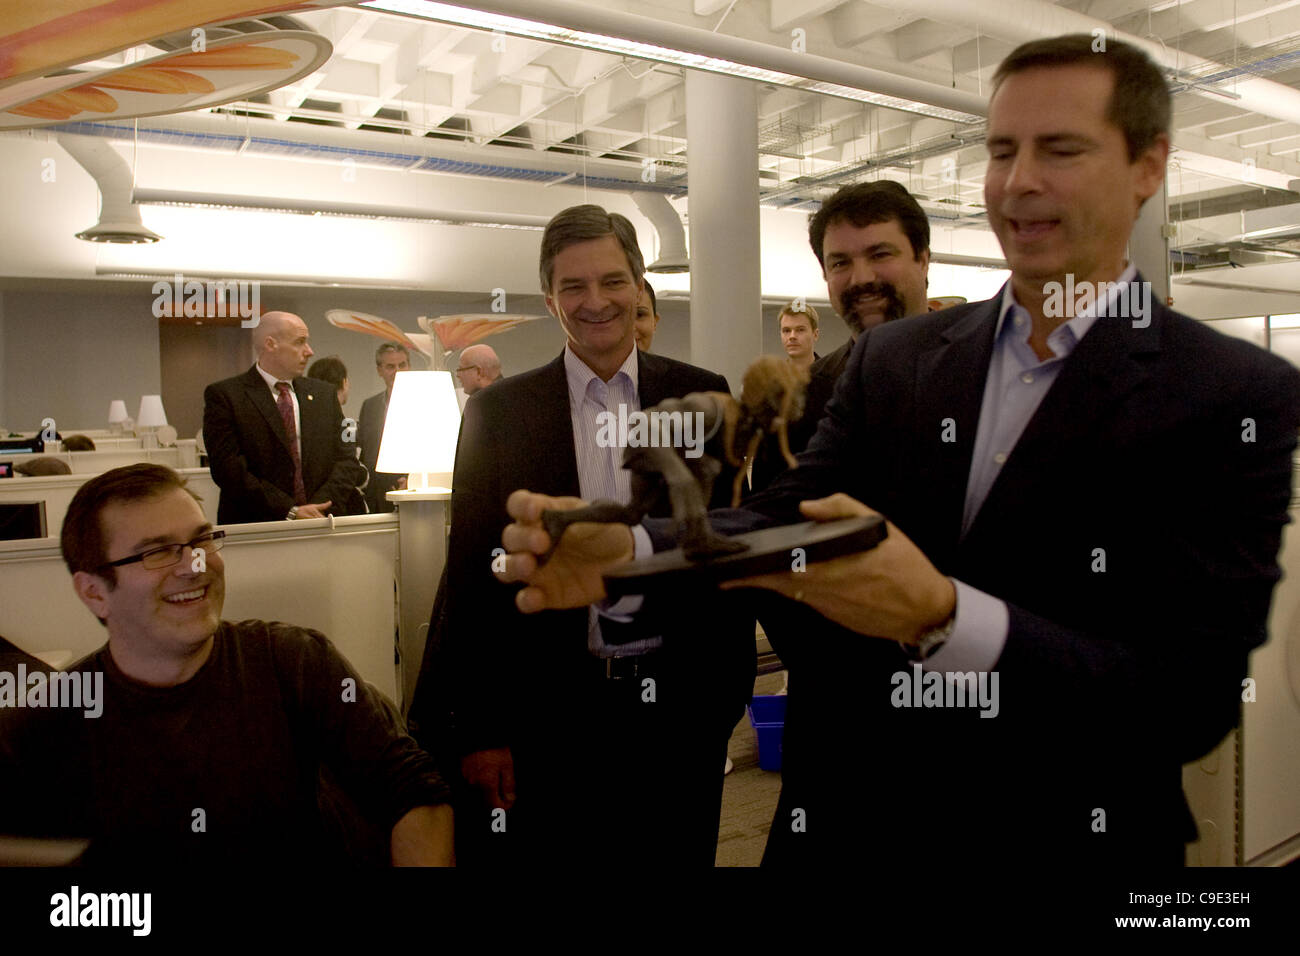 London Ontario, Canada - November 28, 2011. Dalton McGuinty, Premier of Ontario, right looks over a 'Darkling' statue and shares a joke with Jeff Ross, left, Chris Bentley MPP - London West and James Schmalz, president and founder of Digital Extremes. McGuinty was in London to make a funding announc Stock Photo